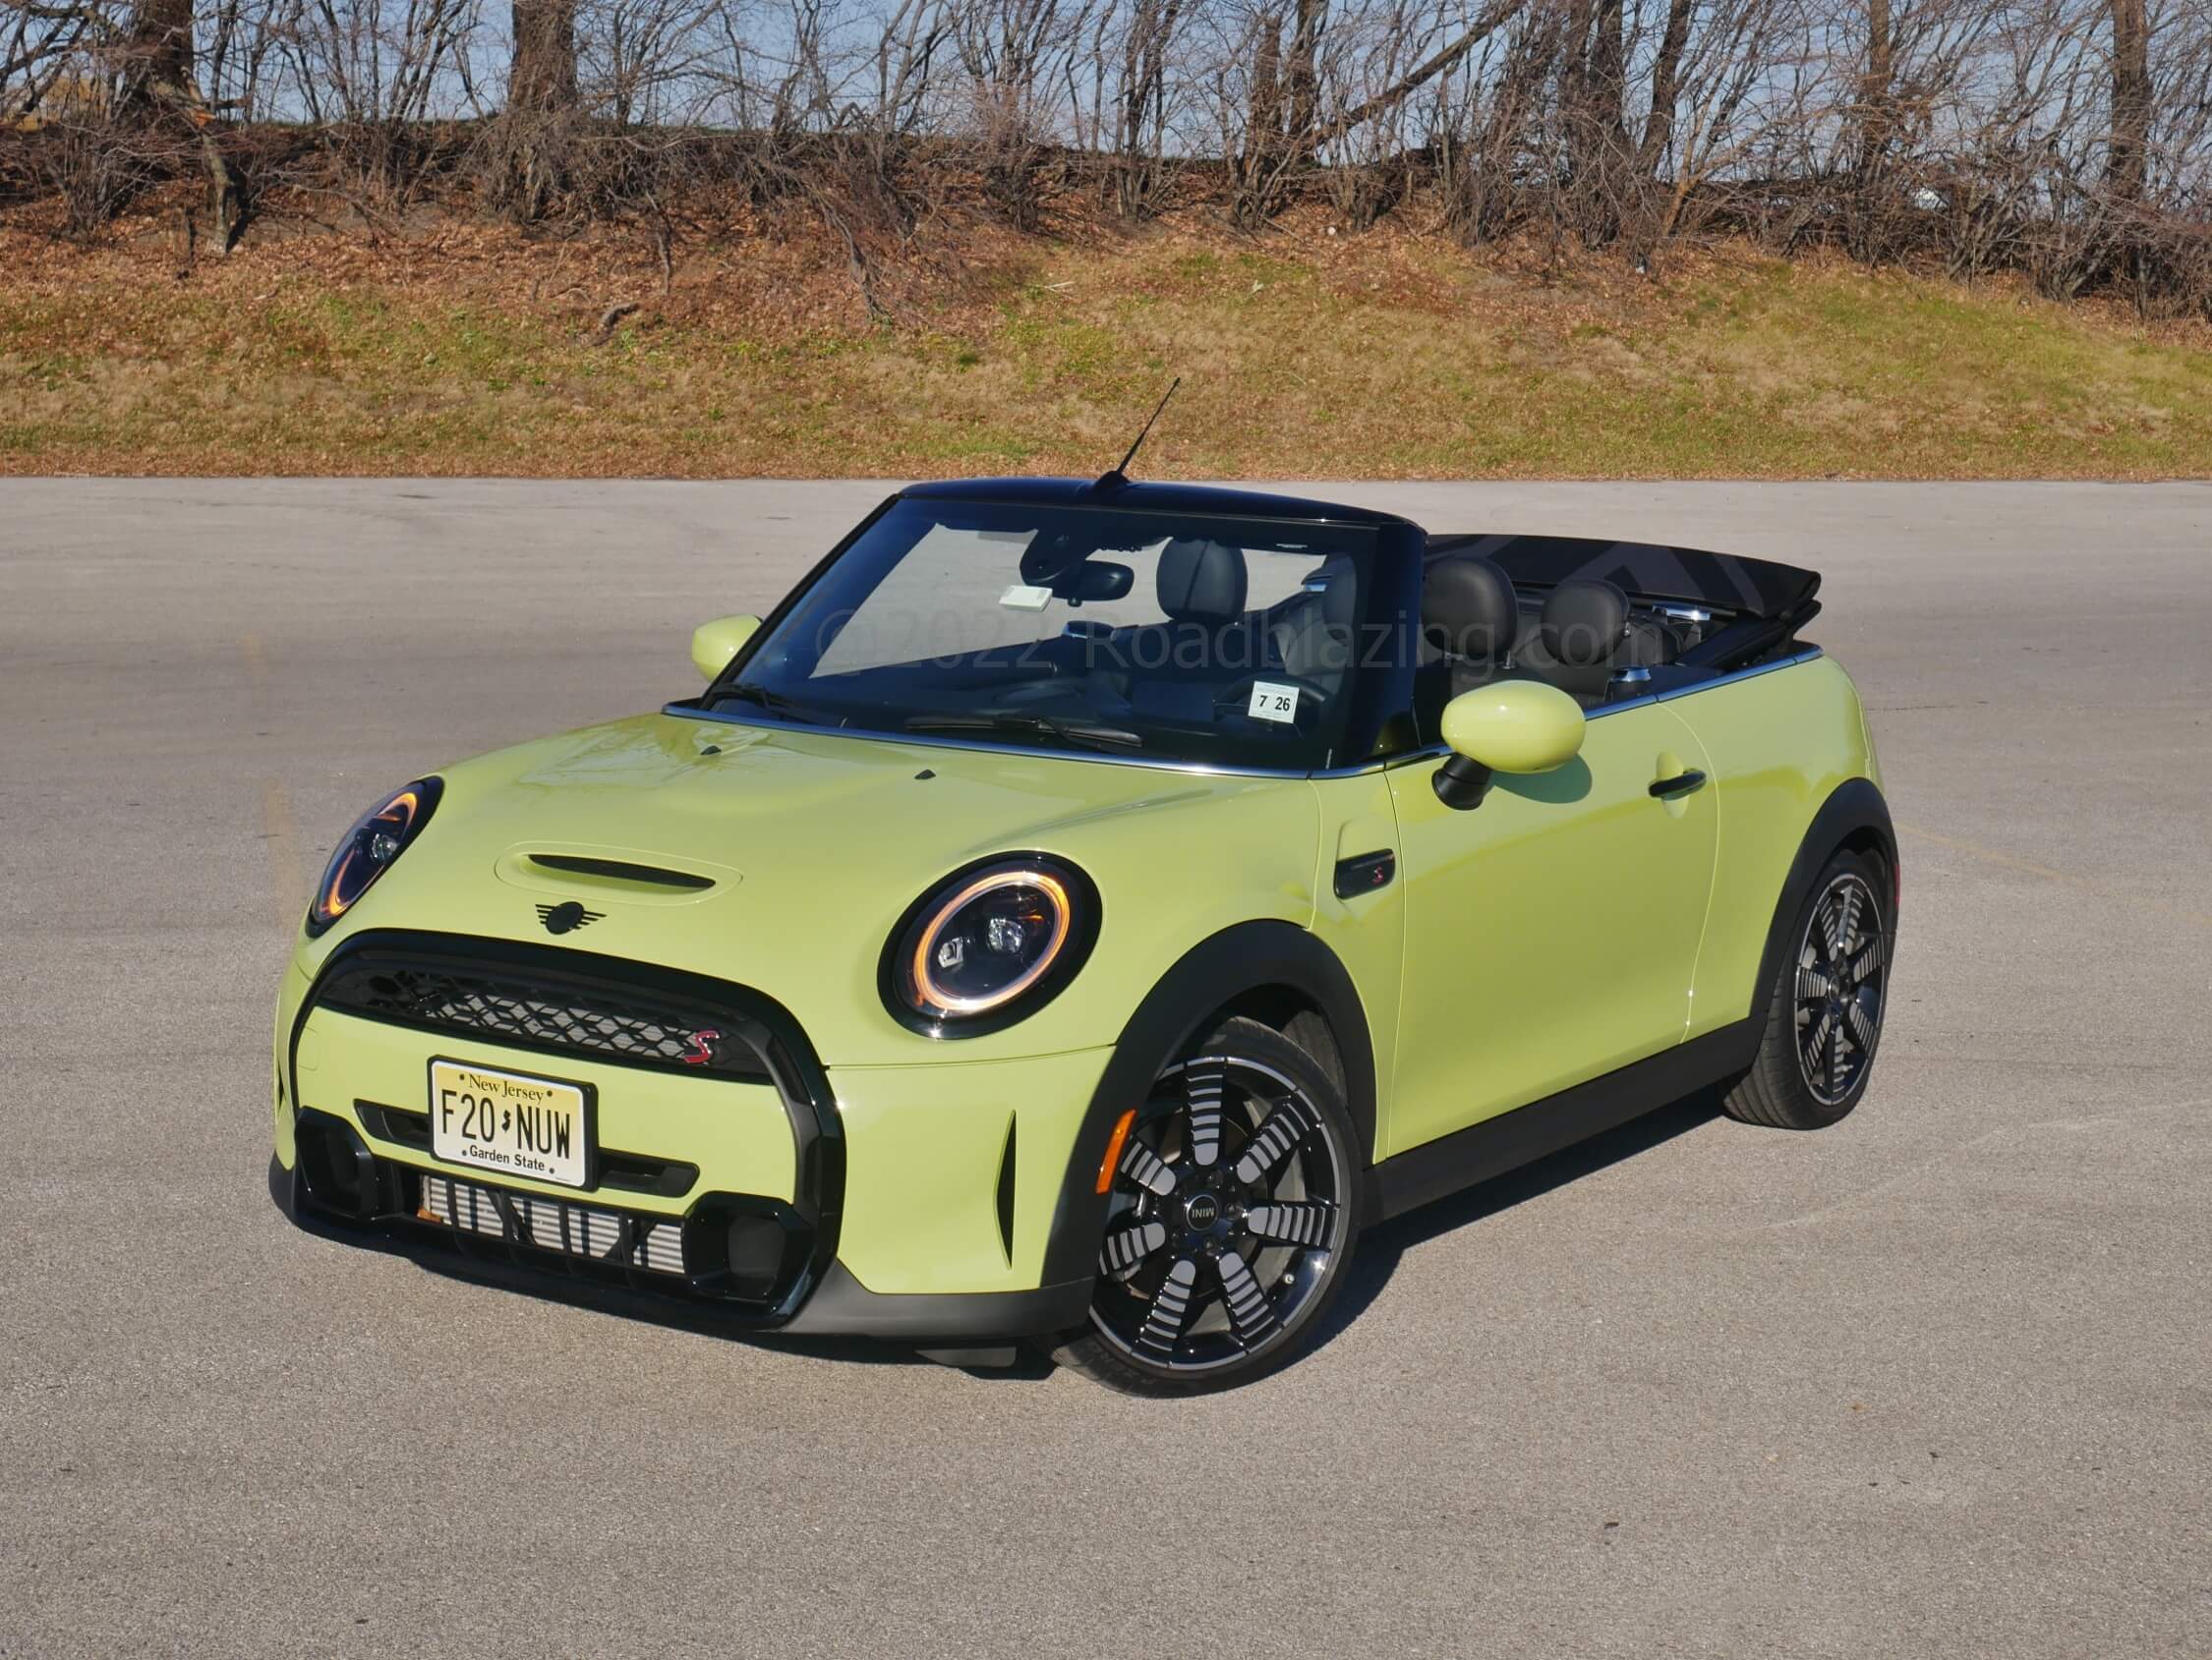 2022 MINI Cooper S Convertible: Sir Alec Issigonis' original front drive transverse subcompact layout manages surprising roominess